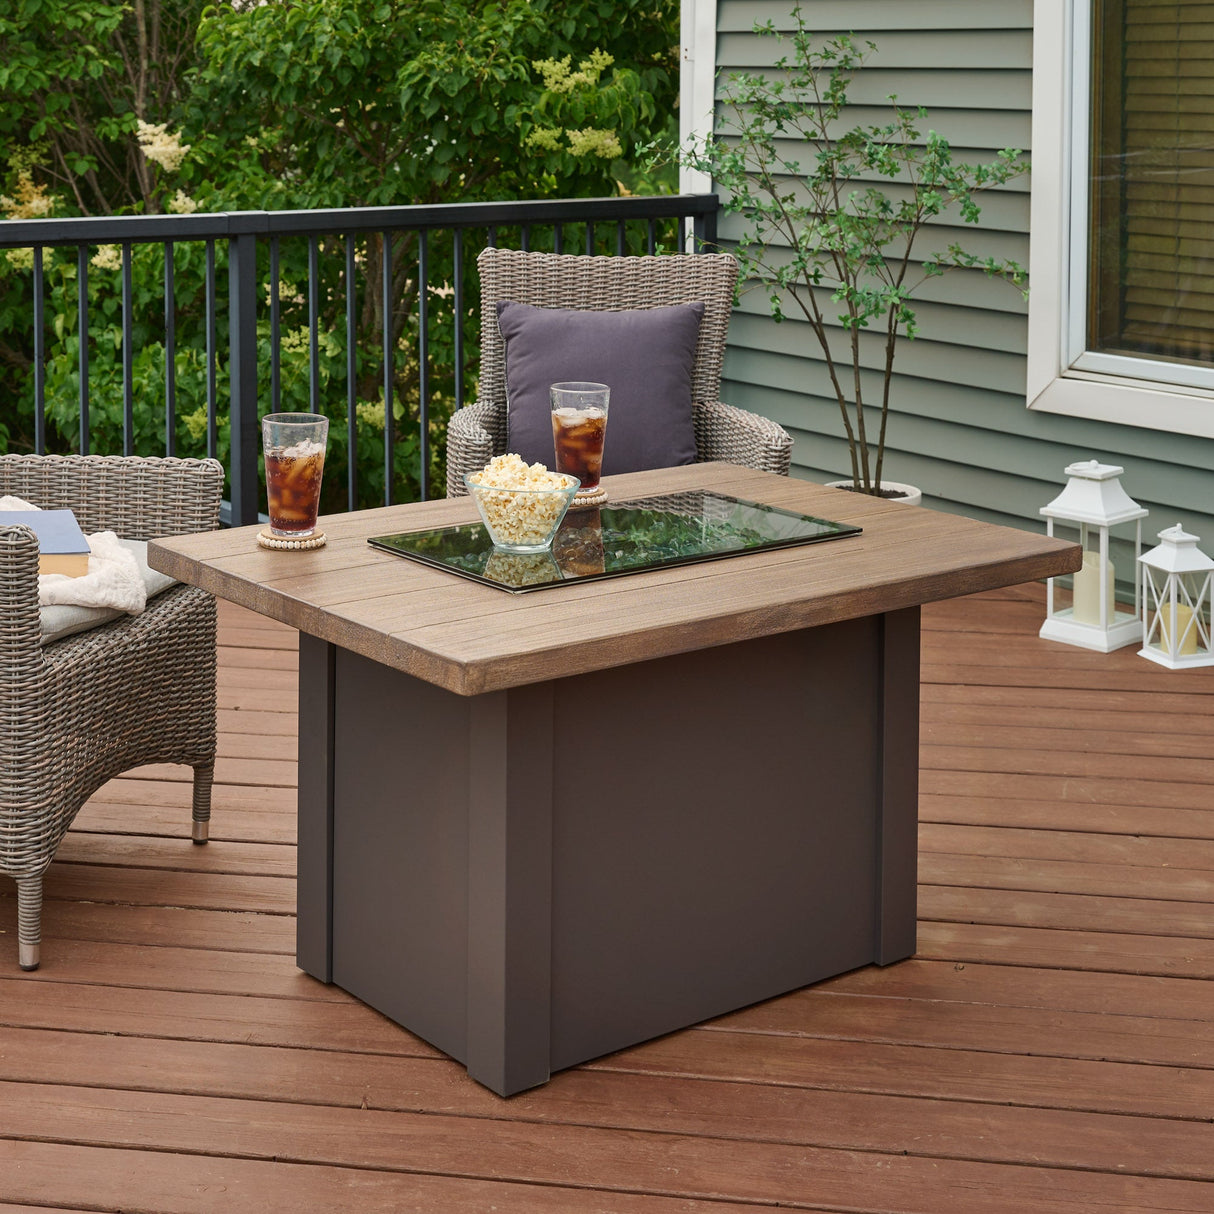 Food and drink placed on top of a Havenwood Rectangular Gas Fire Pit Table on a patio setup